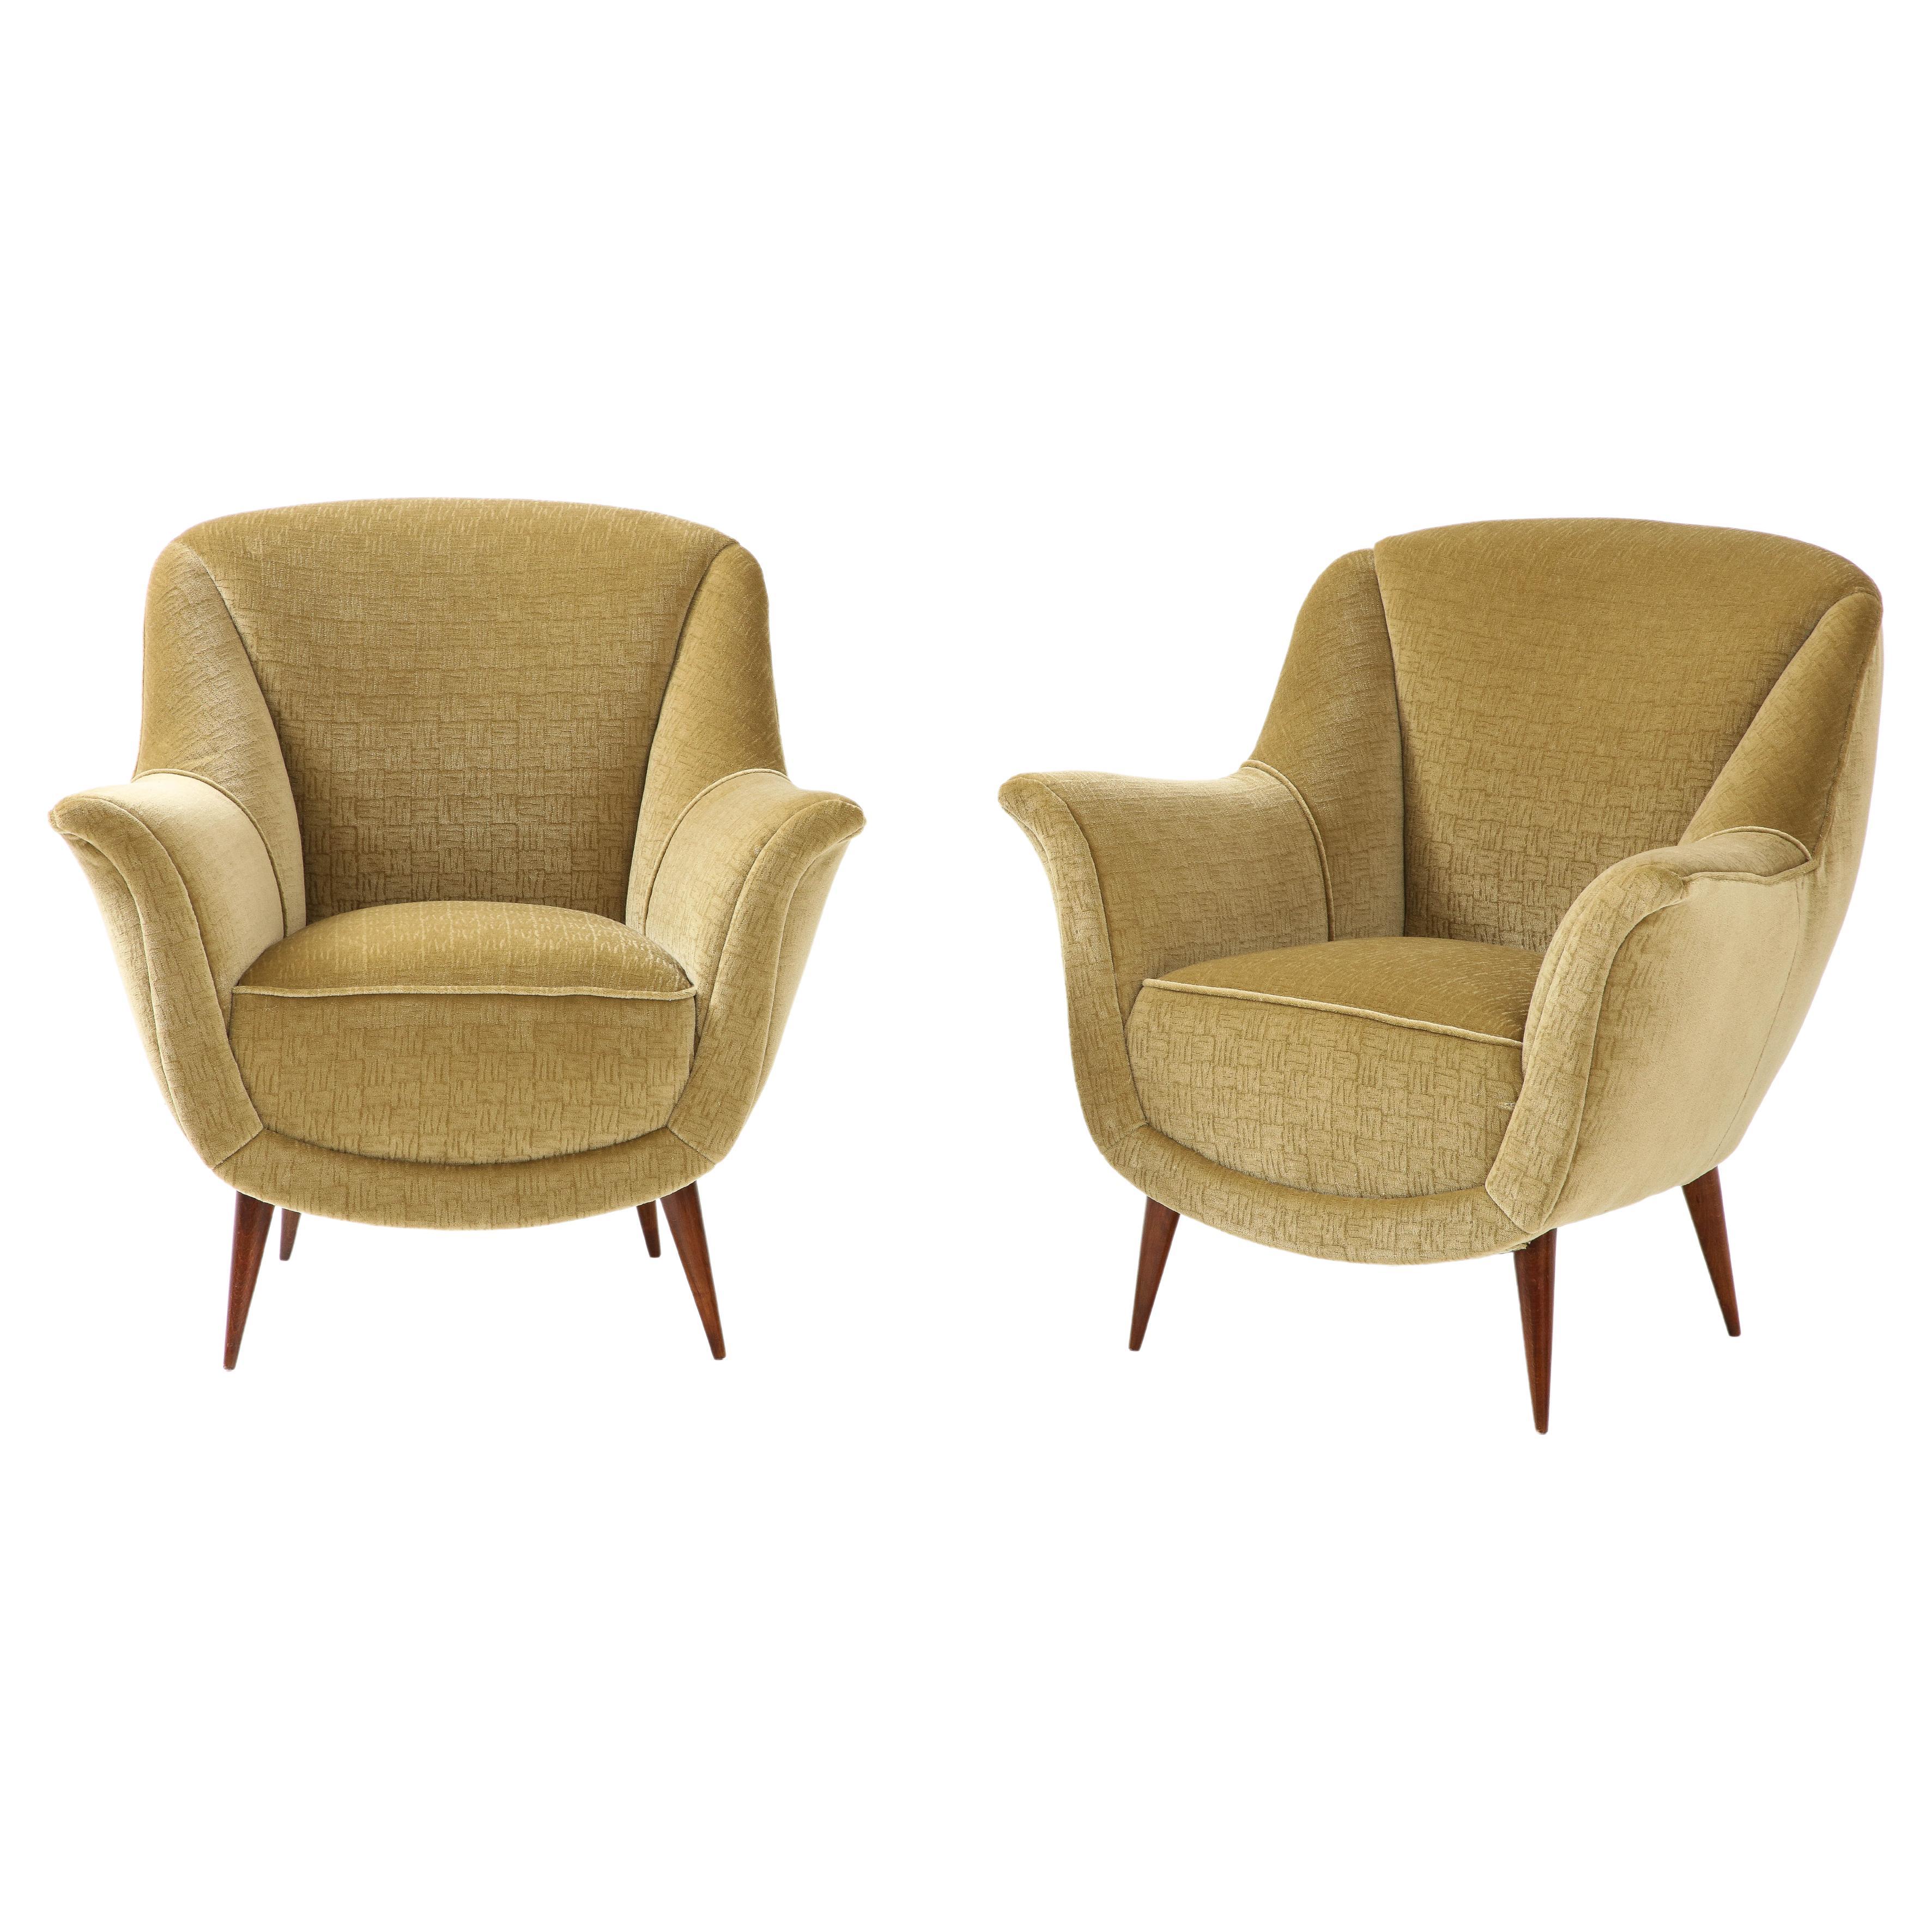 1950's Modernist Gio Ponti Style Italian Lounge Chairs In Mohair Upholstery